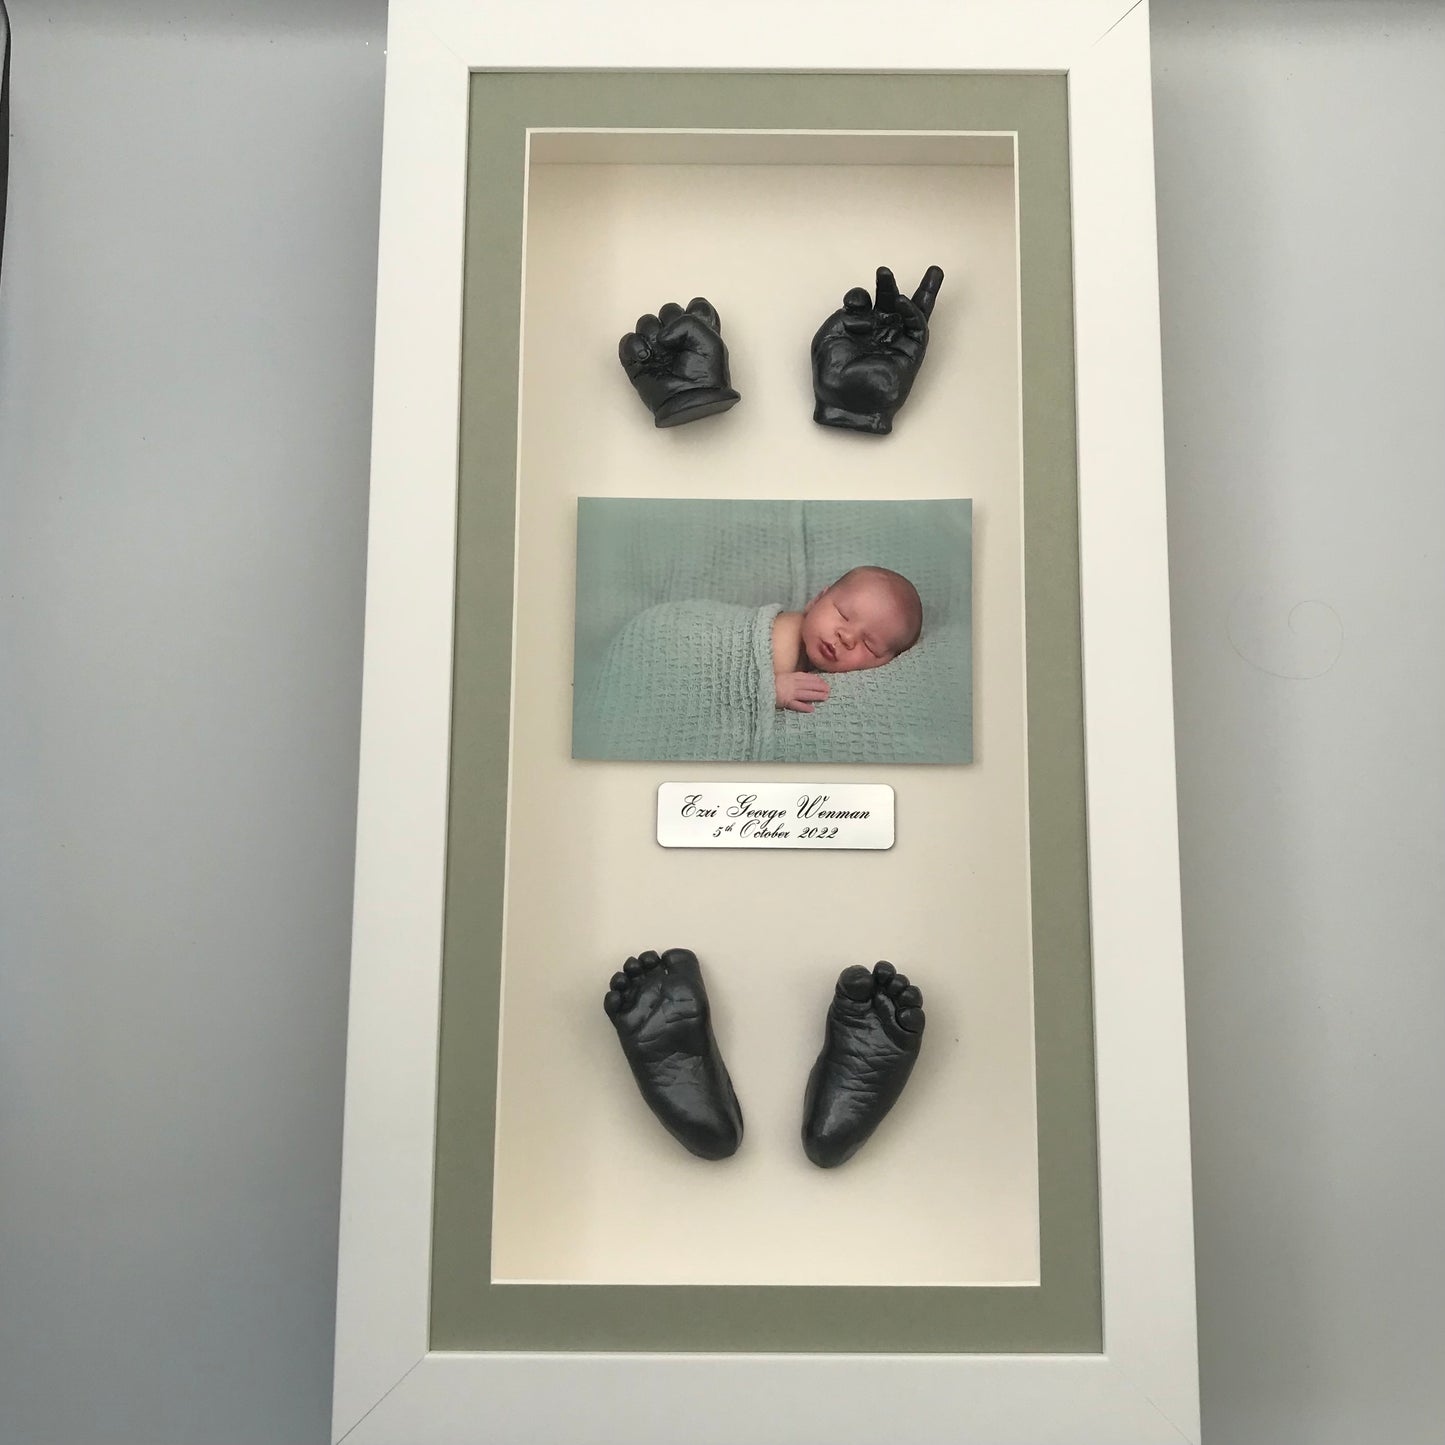 3D Framed Full Set Of Casts With Photo